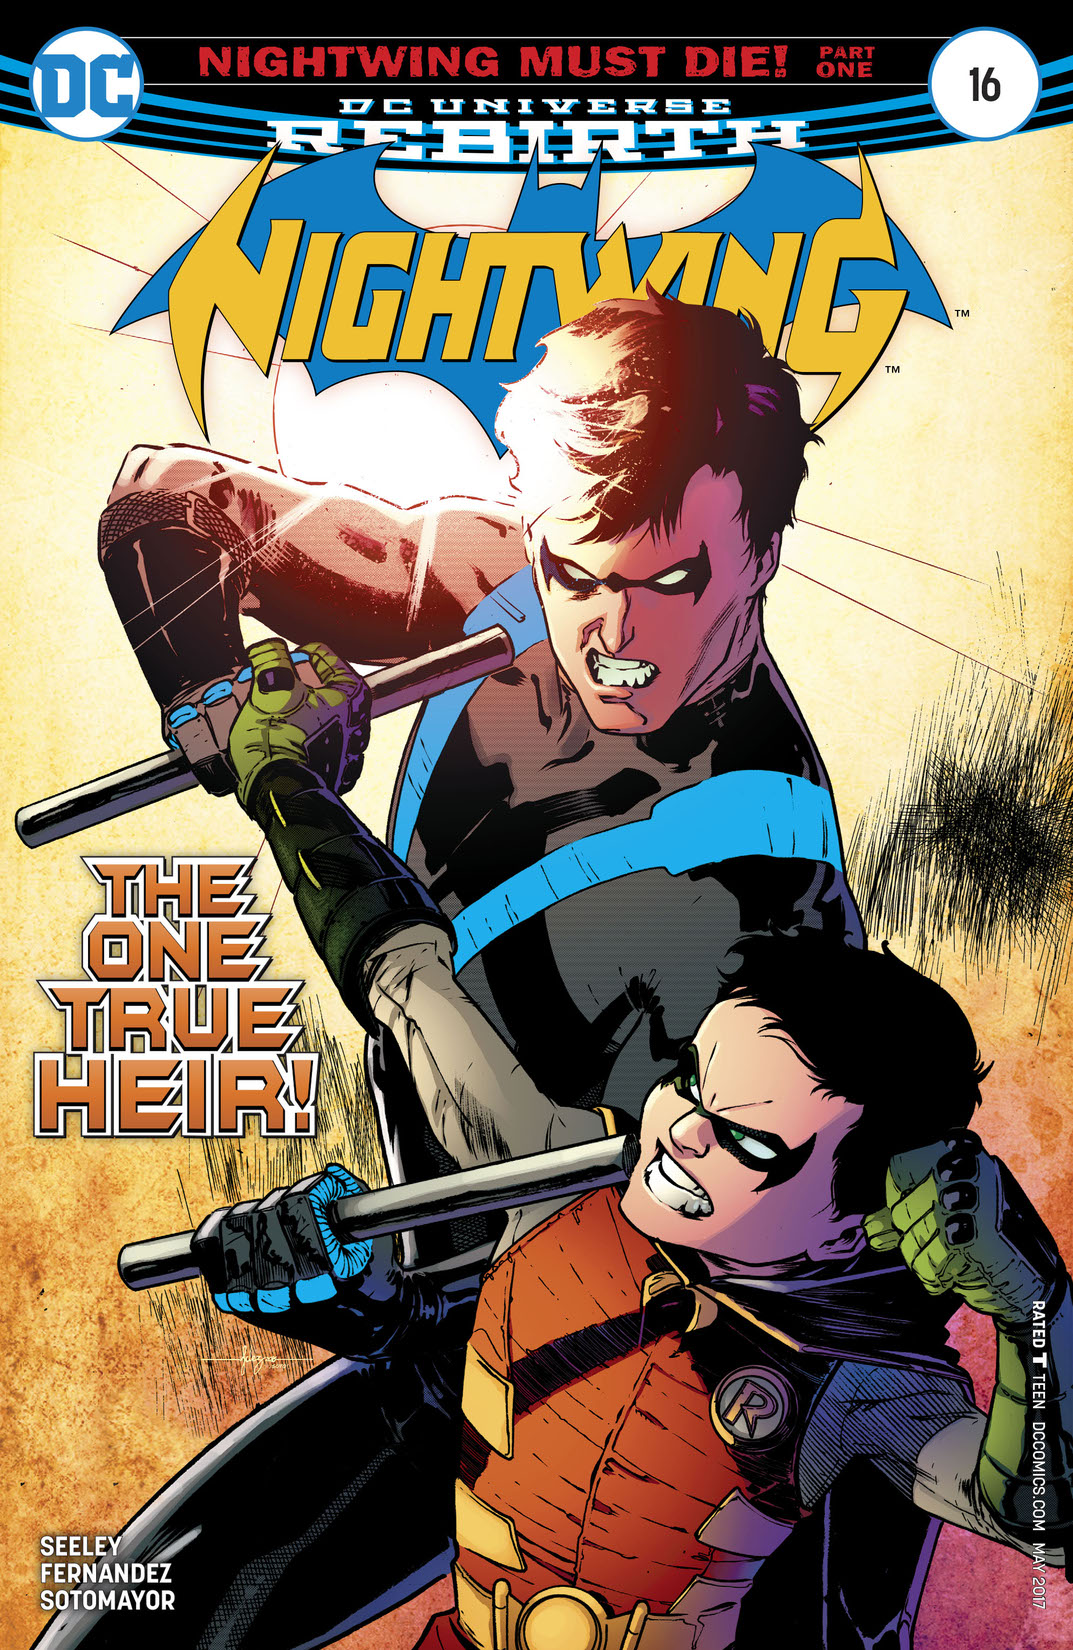 Nightwing (2016-) #16 preview images